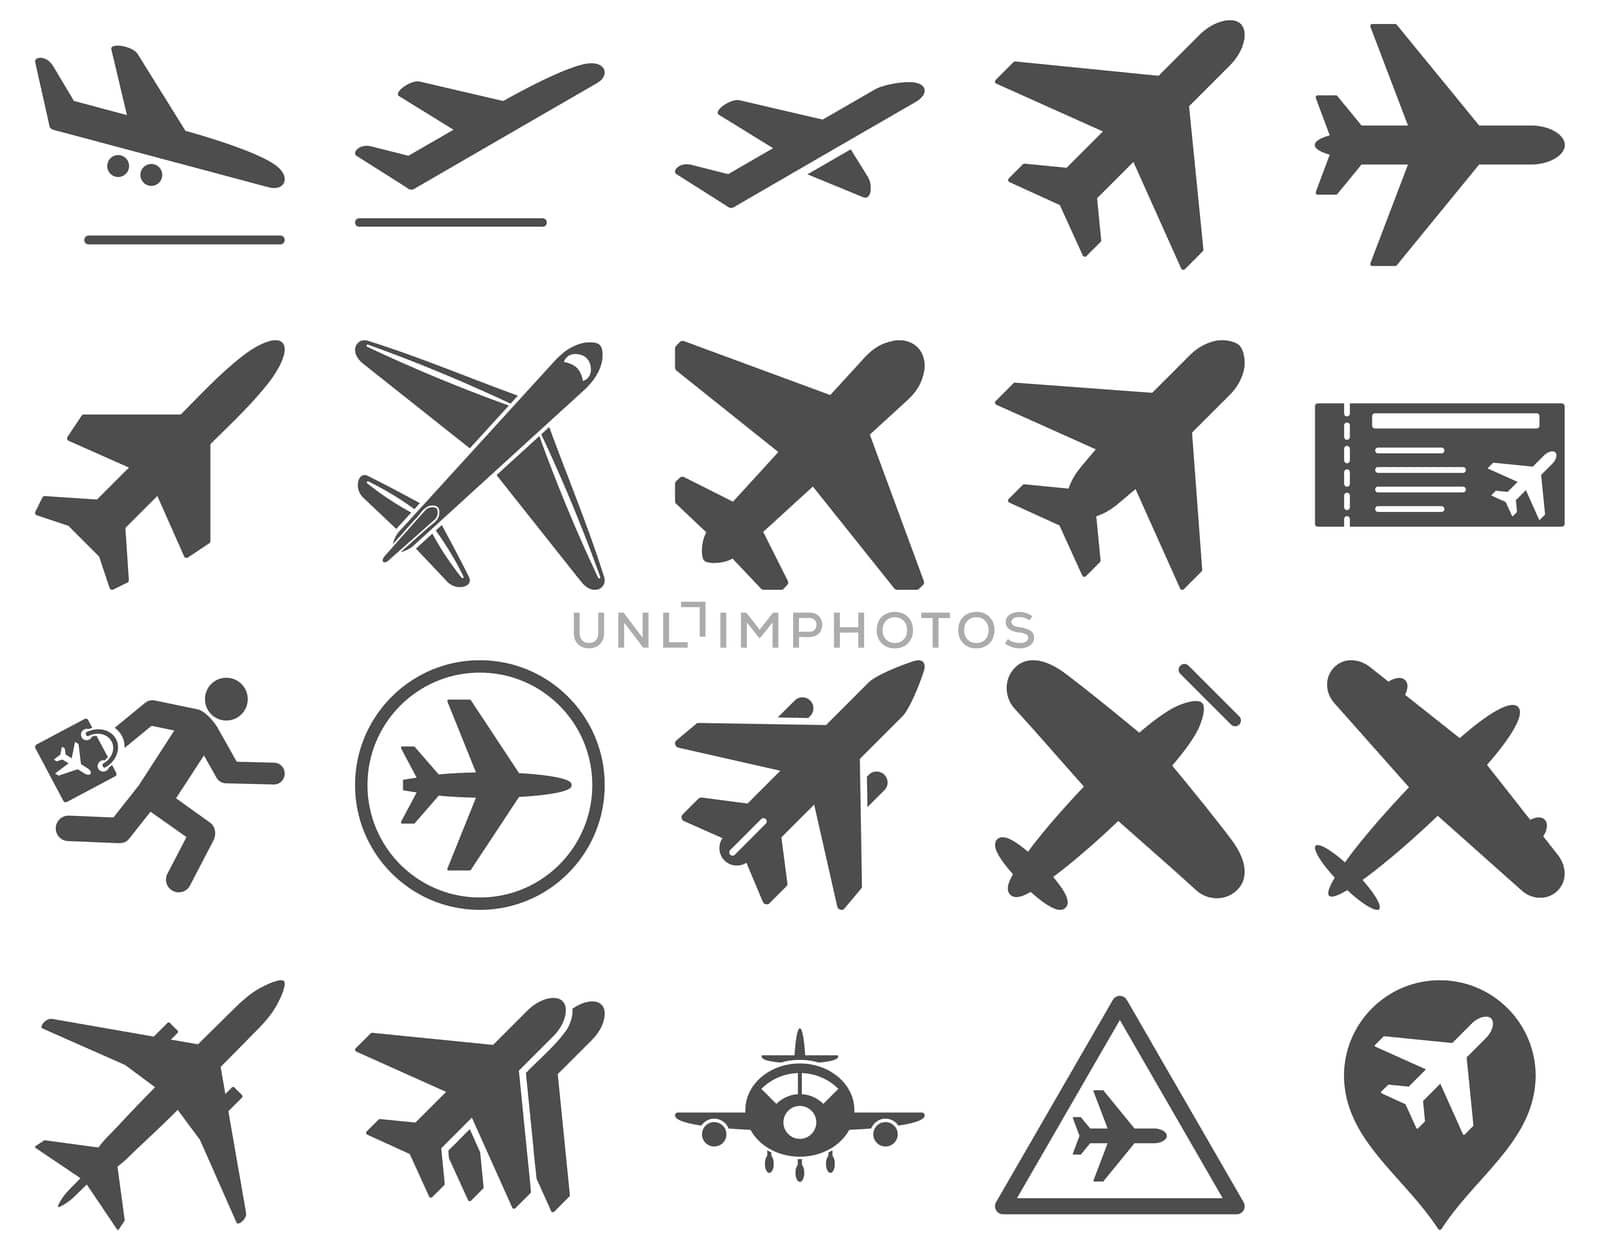 Aviation Icon Set. These flat icons use gray color. Raster images are isolated on a white background.